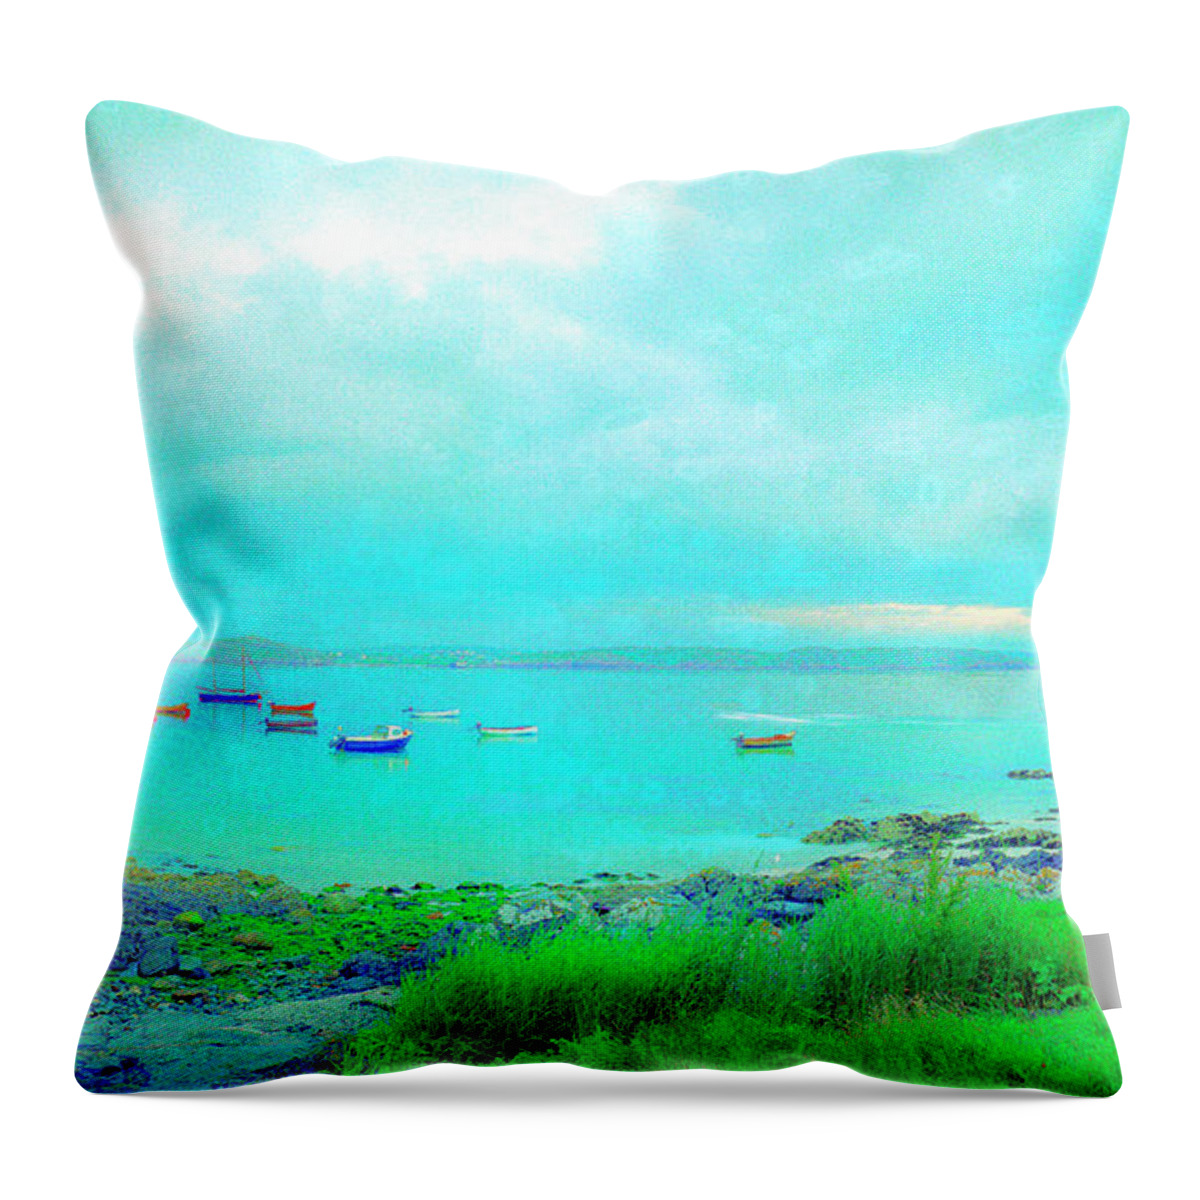 Sand Throw Pillow featuring the photograph Ferry Wake by Jan W Faul